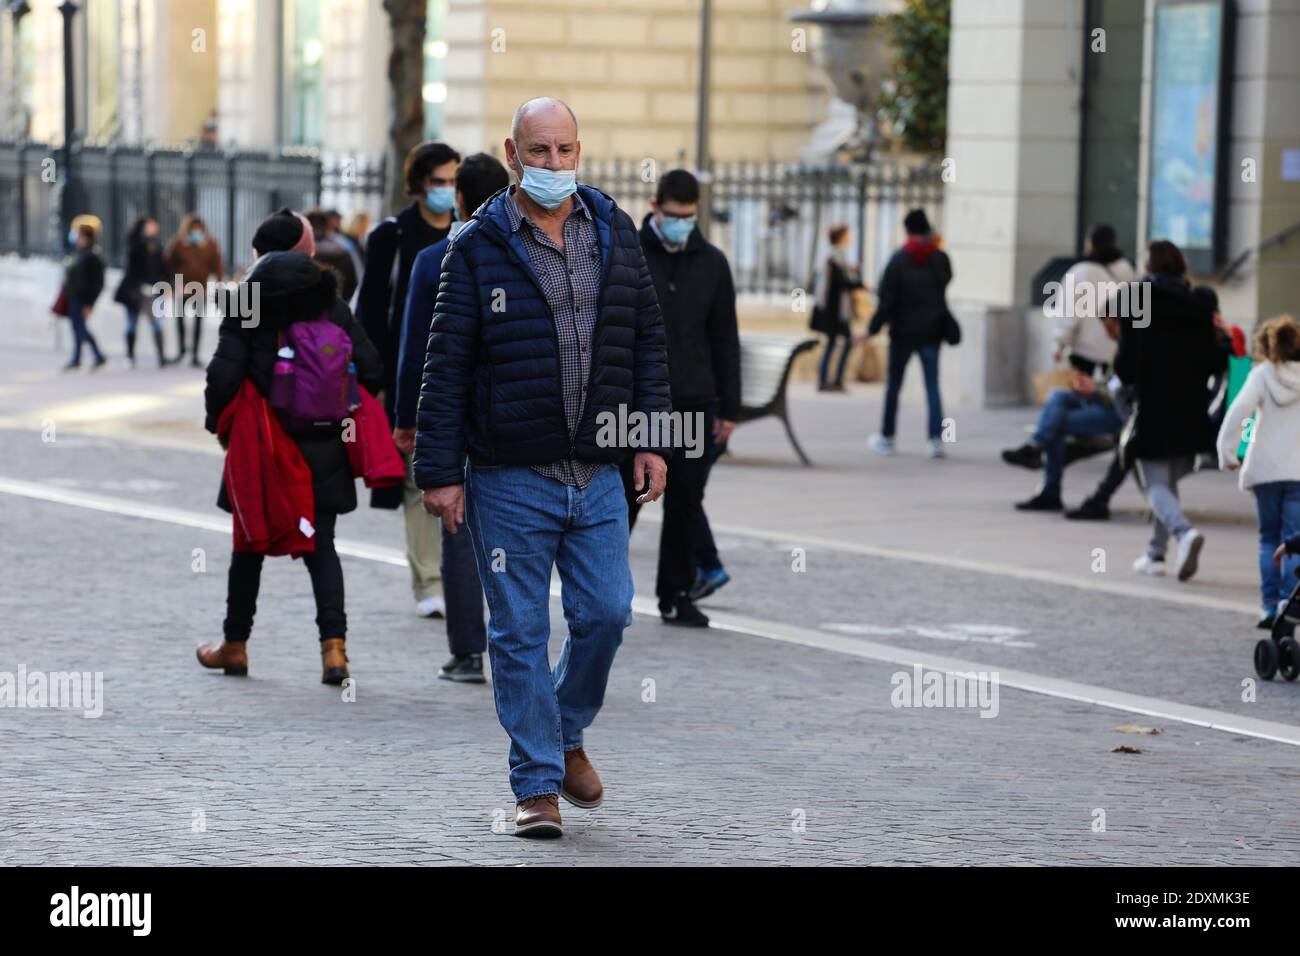 December 22, 2020: Marseille, France. 22 December 2020. People walk and shop in the streets of Marseille wearing protective face masks as the festive season begins in France. France lifted a lockdown on December 15th which reduced infection rates, yet there are still restrictions imposed to prevent another surge of Covid-19 cases in the country. All shops are open although they have strict health protocols in place and a limit on customer number Credit: Louai Barakat/IMAGESLIVE/ZUMA Wire/Alamy Live News Stock Photo